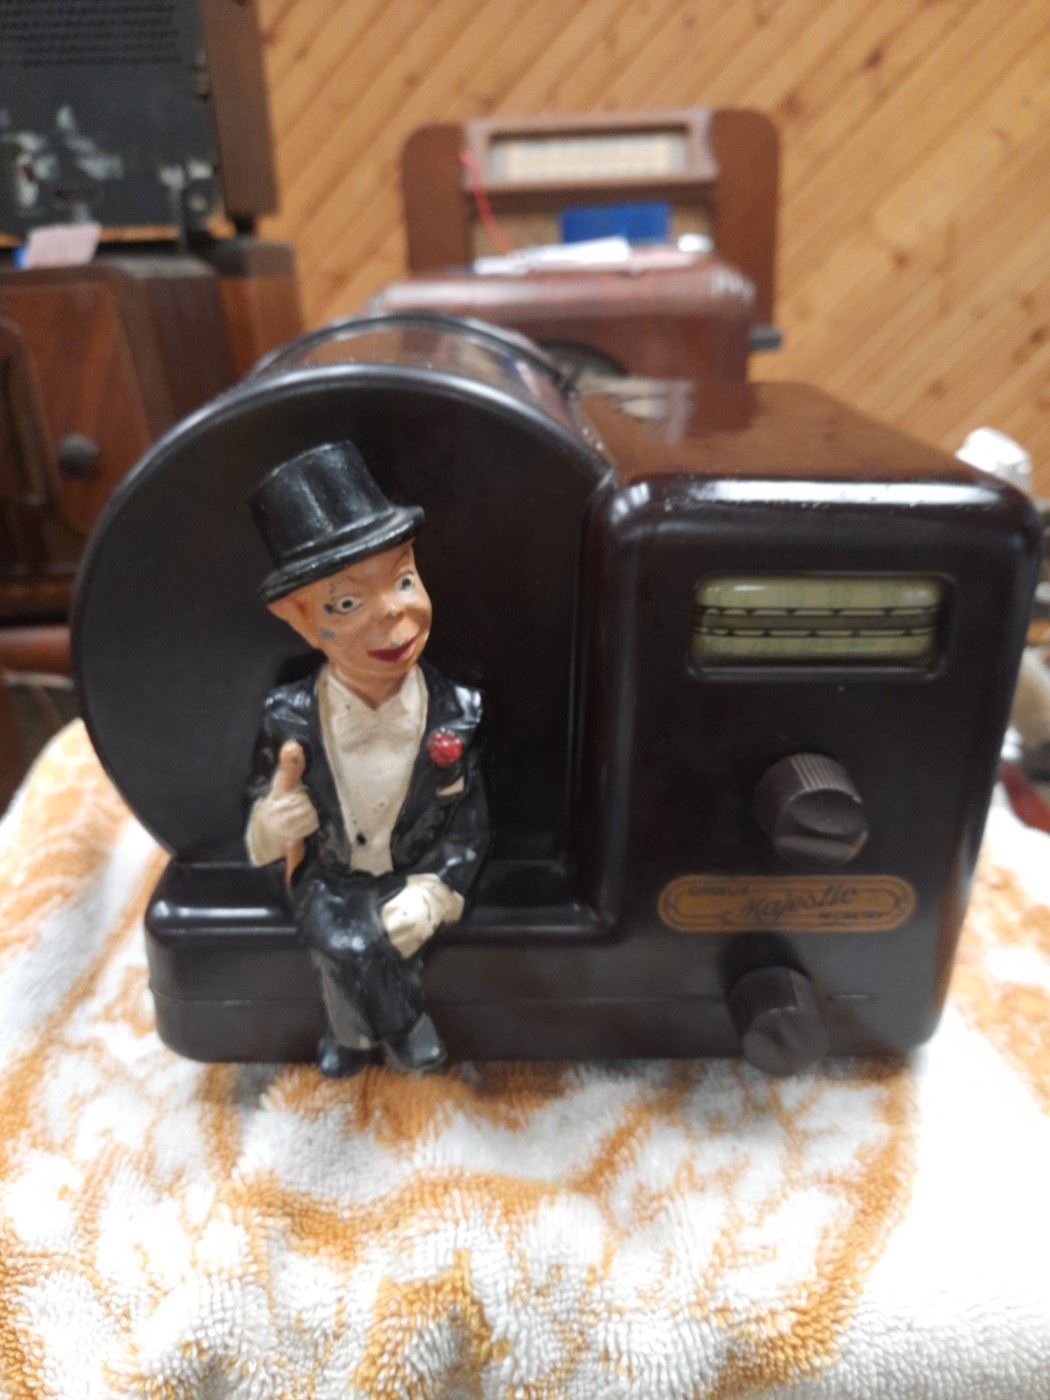 Great Charlie McCarthy radio!  This item is located at the offsite location June 1-4.